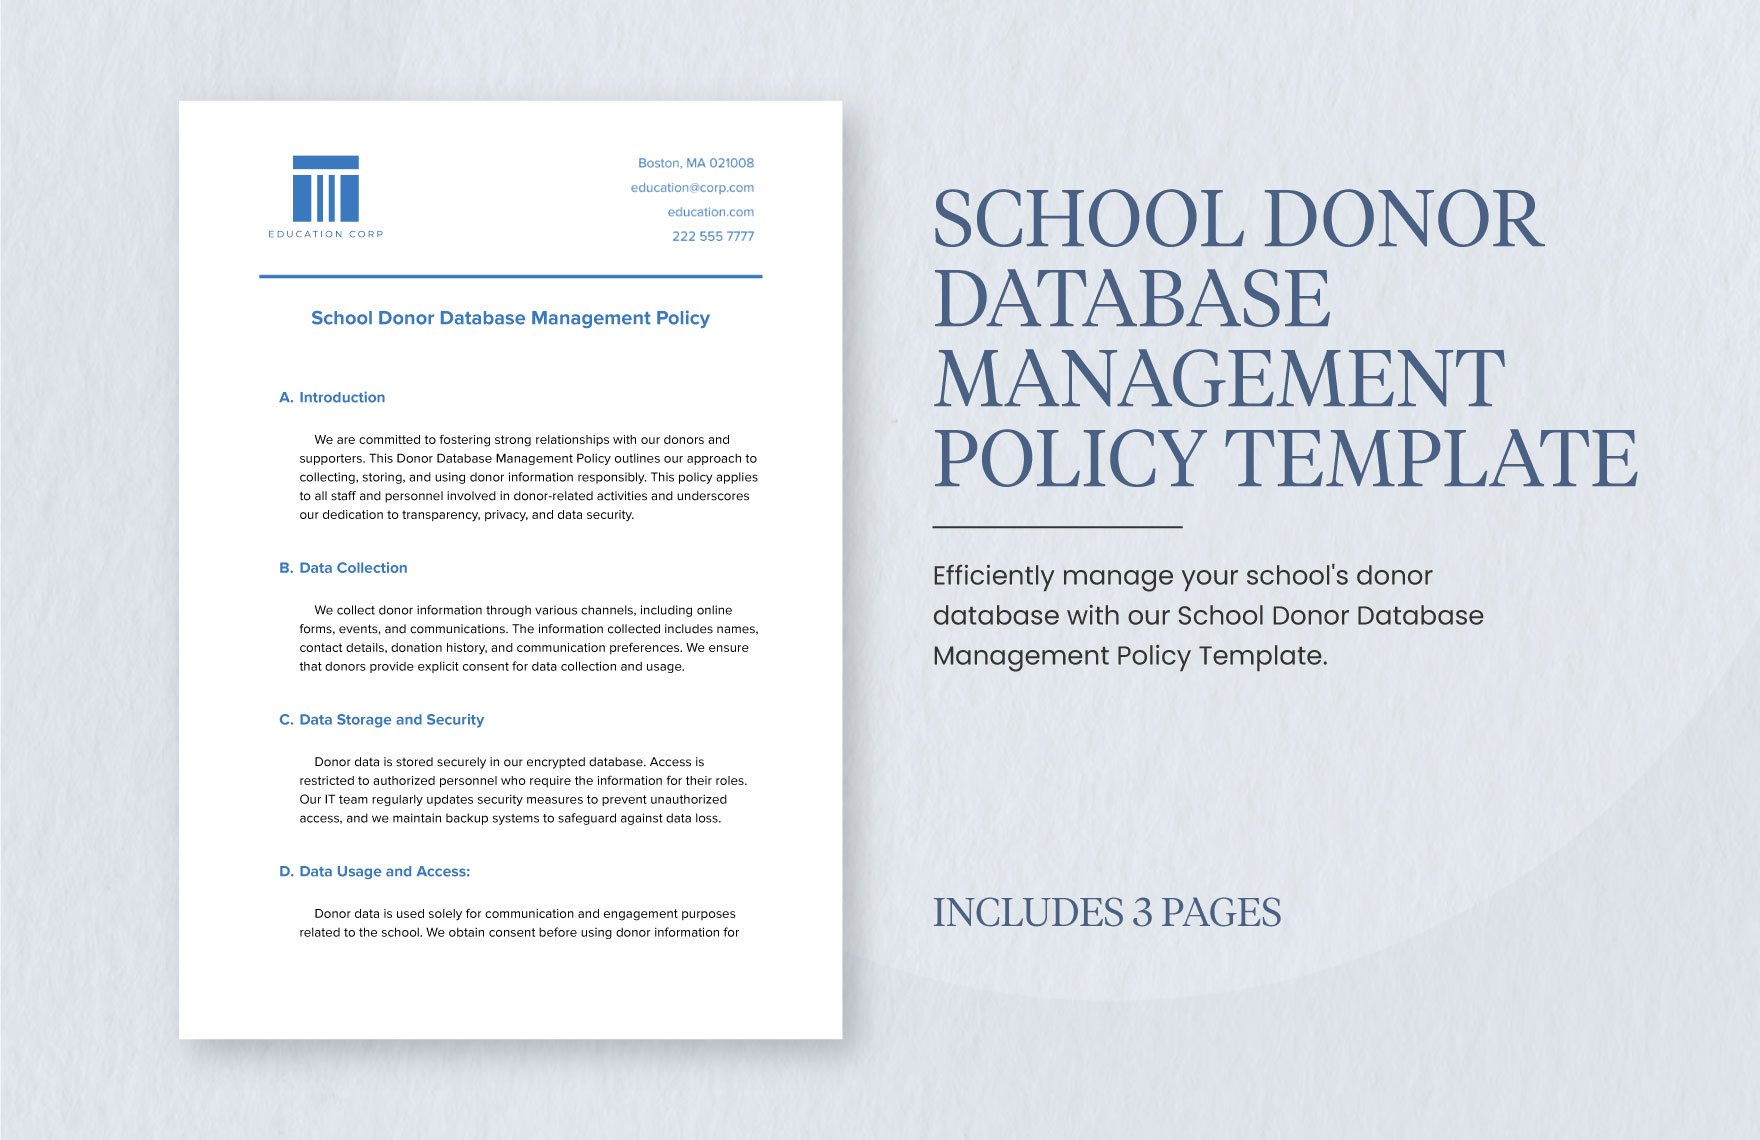 School Donor Database Management Policy Template